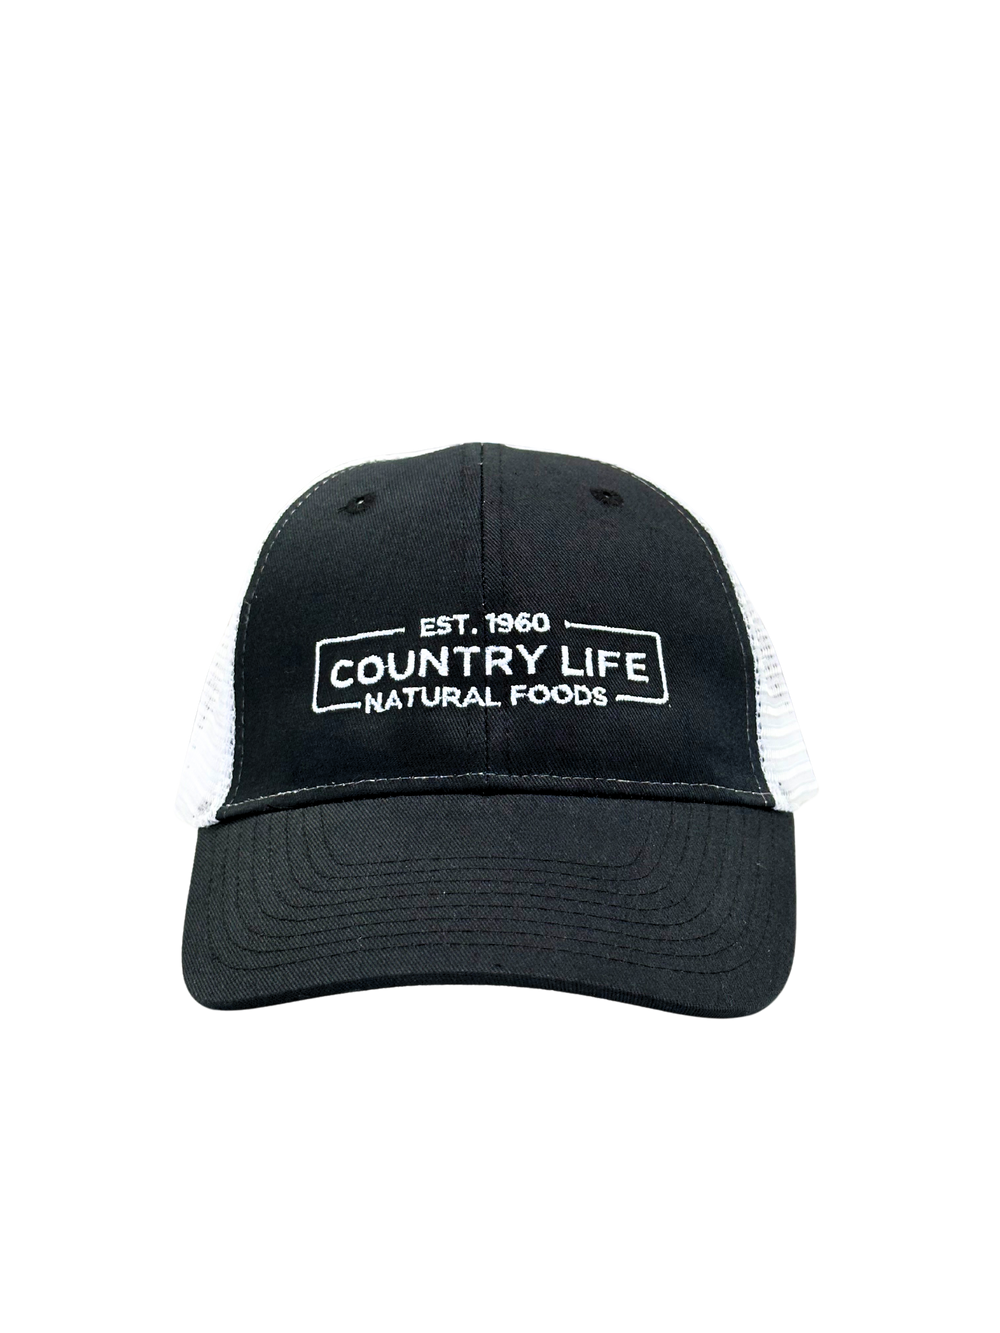 Country Life Hat - Country Life Natural Foods